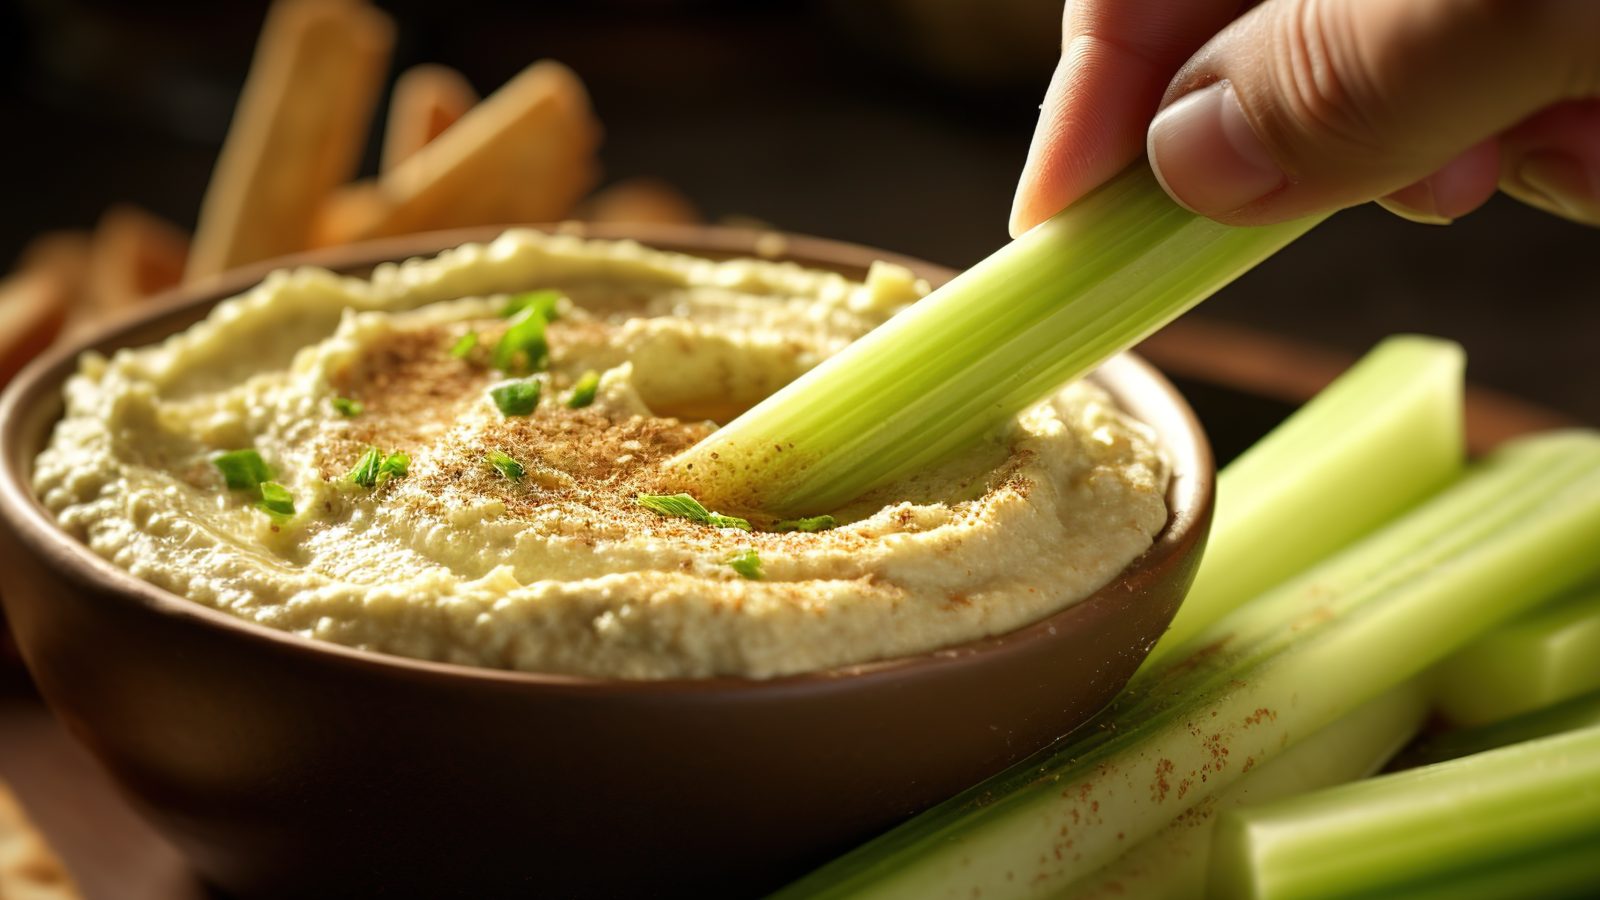 Is hummus and celery a healthy snack for weight loss?